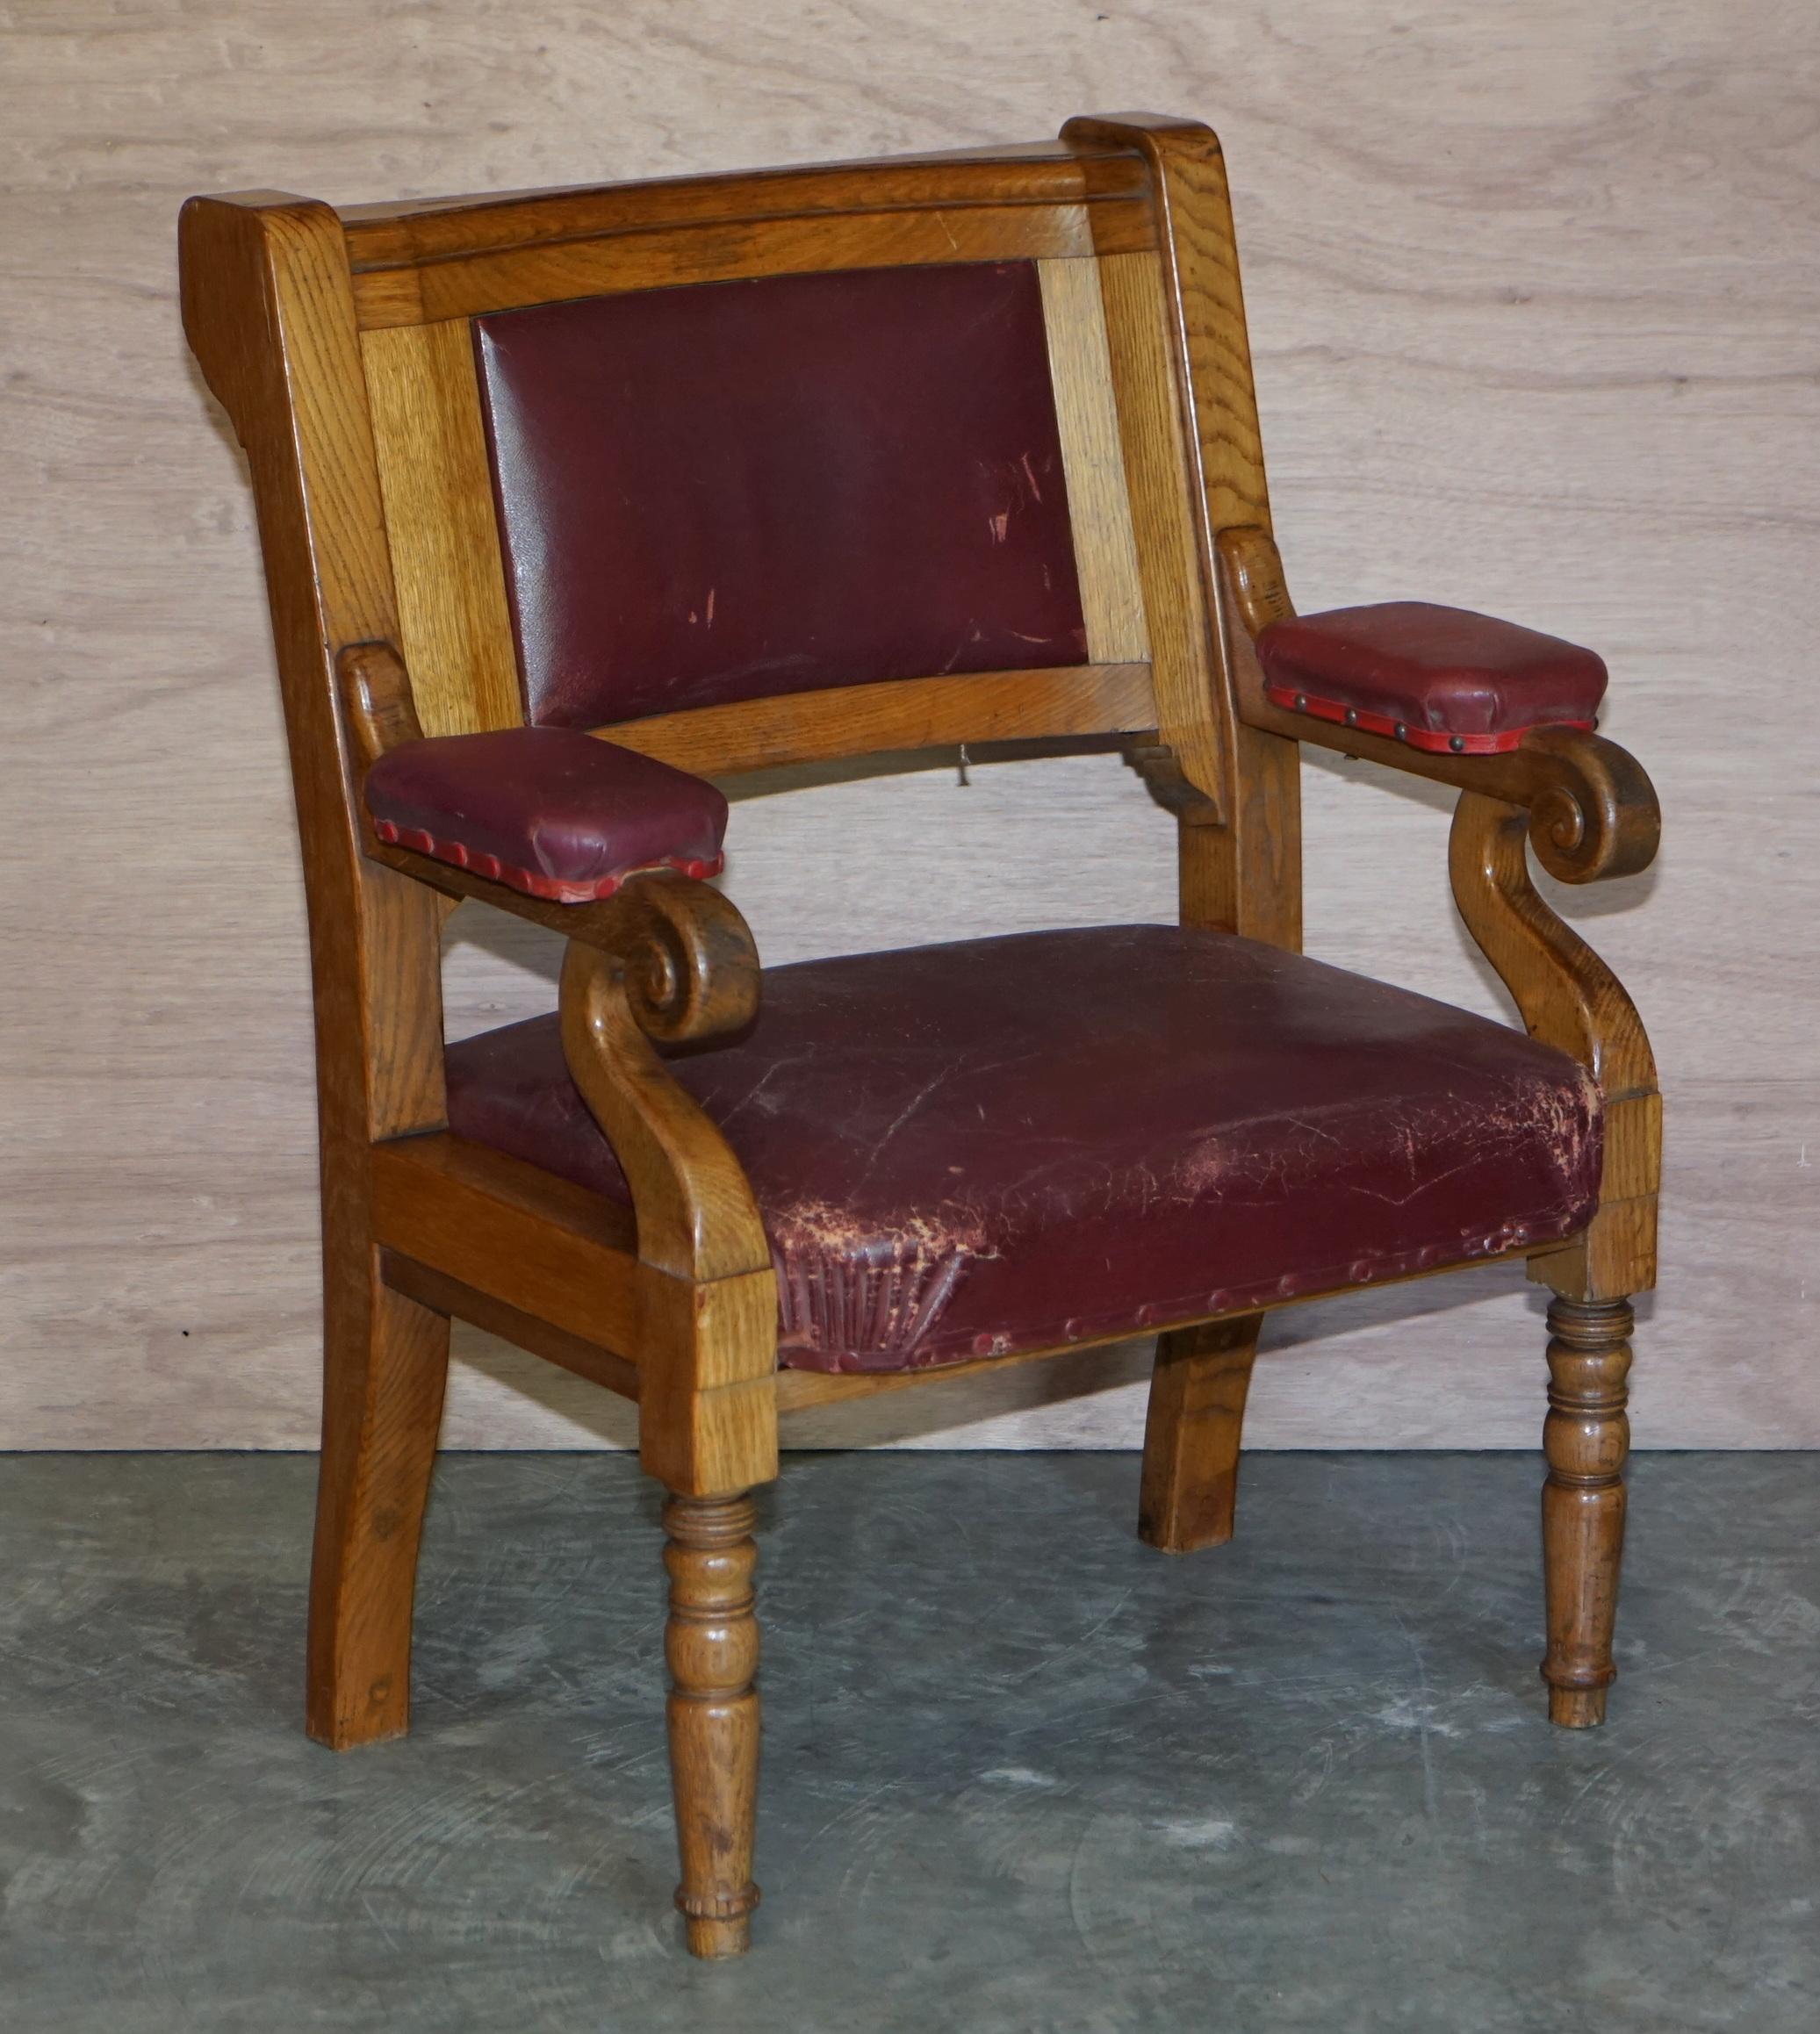 We are delighted to offer this suite of six original Victorian antique oversized, distressed brown leather upholstery golden oak framed Freemason armchairs

These chairs are very impressive and important looking. They are made with golden oak